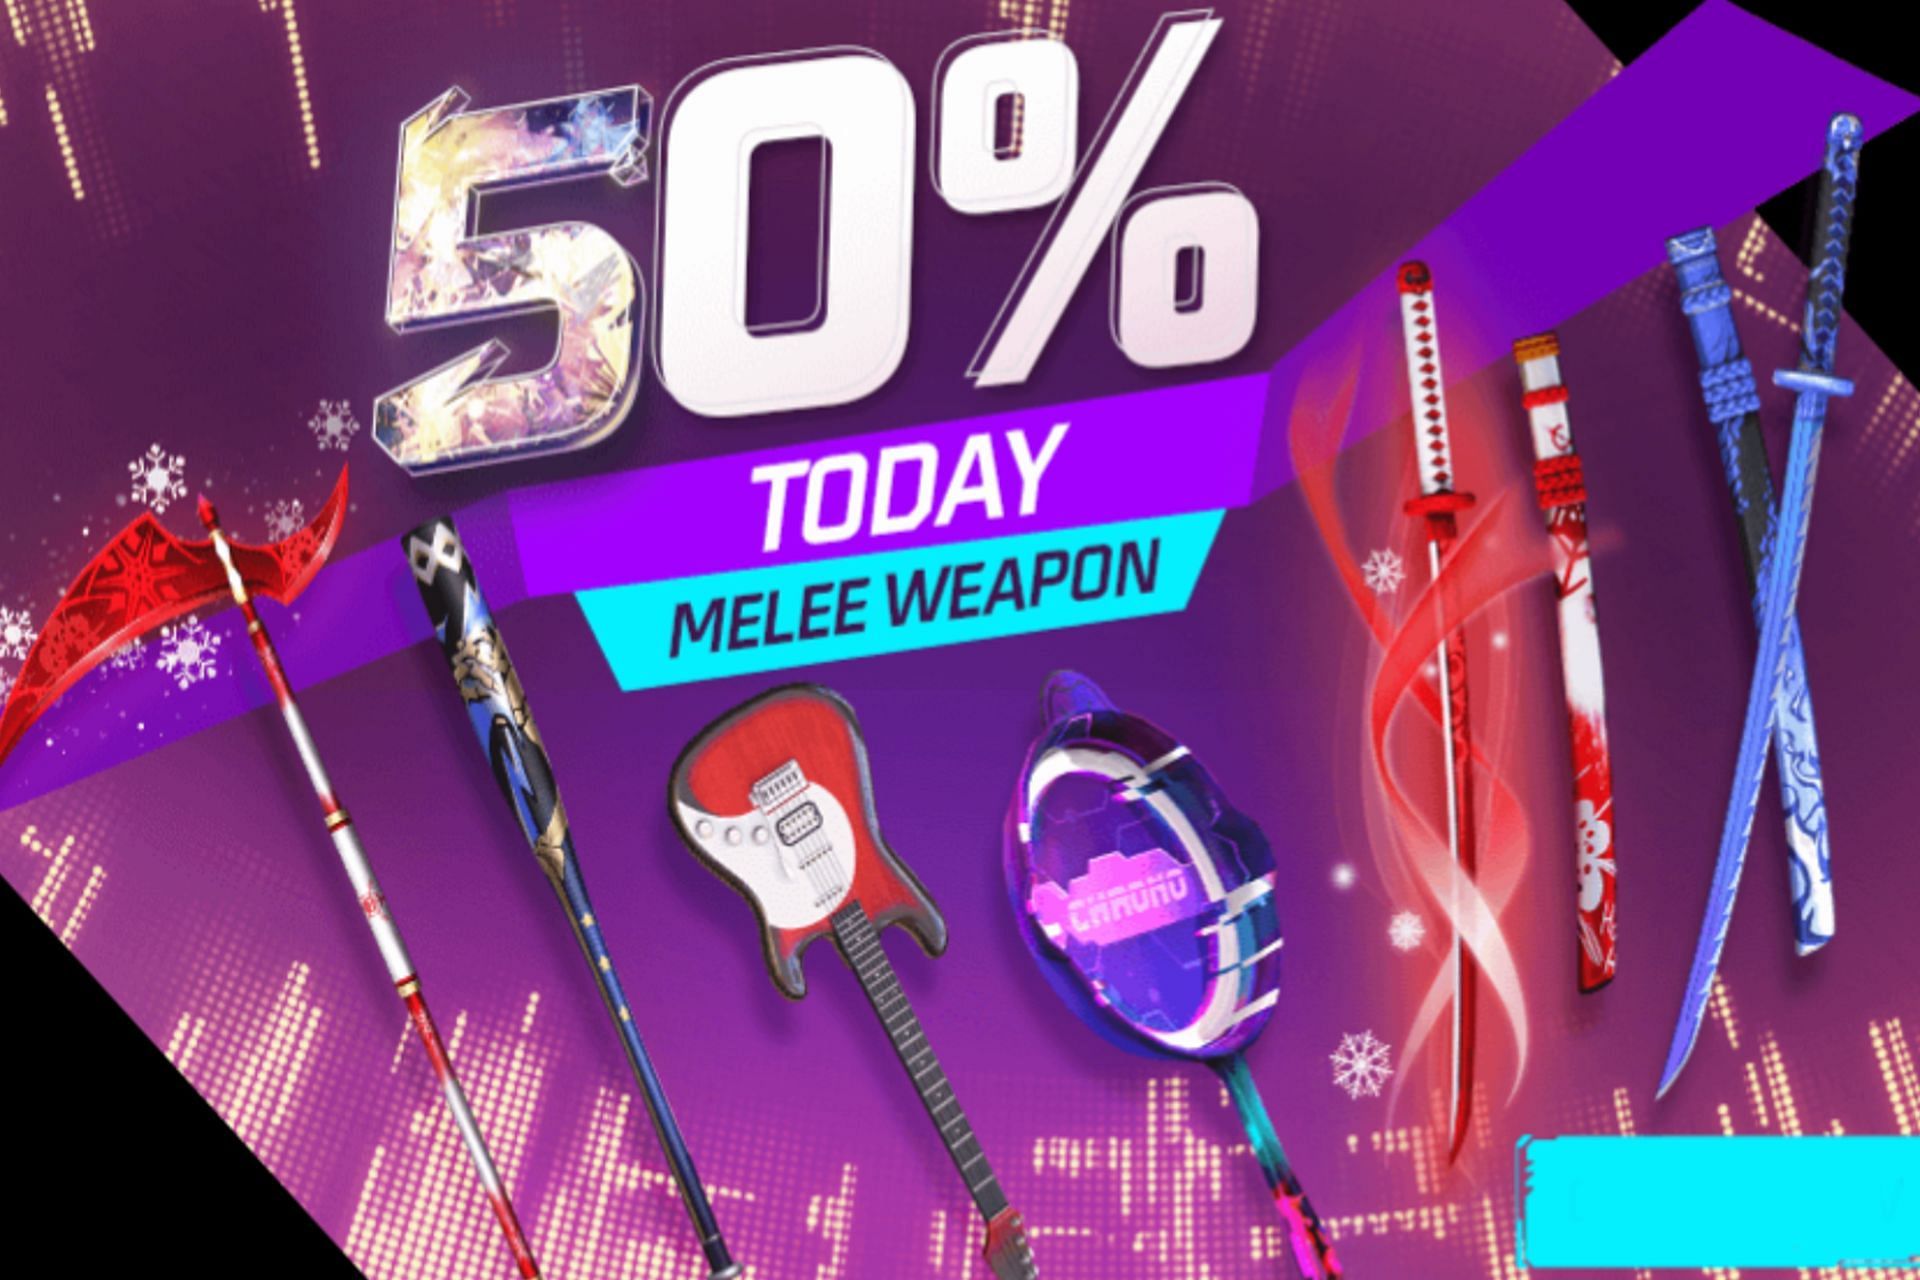 Melee weapon skins are available for 50% discount today in Free Fire MAX (Image via Garena)